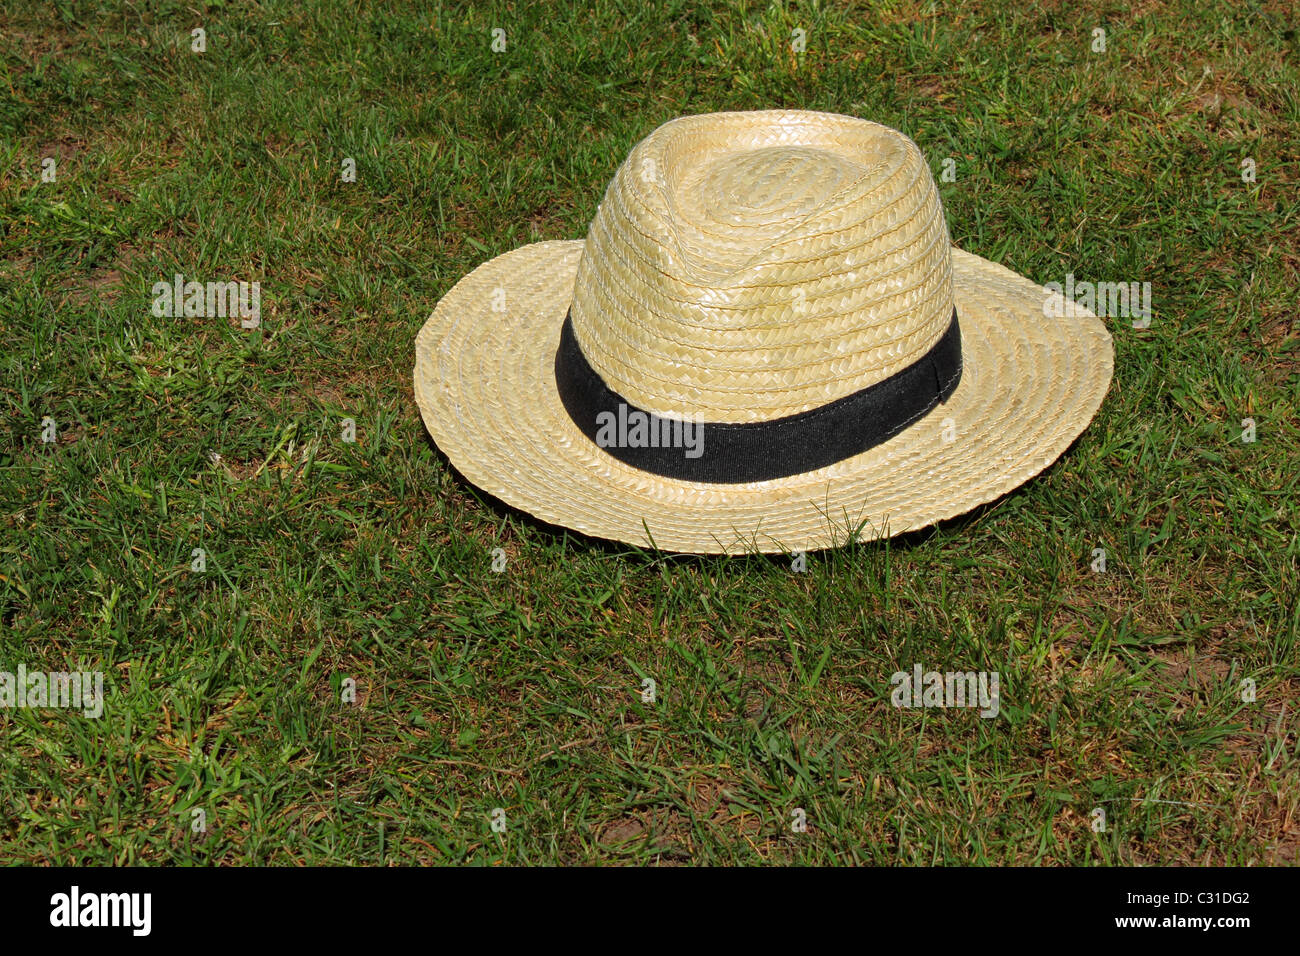 A Fedora type Hat on Grass Stock Photo